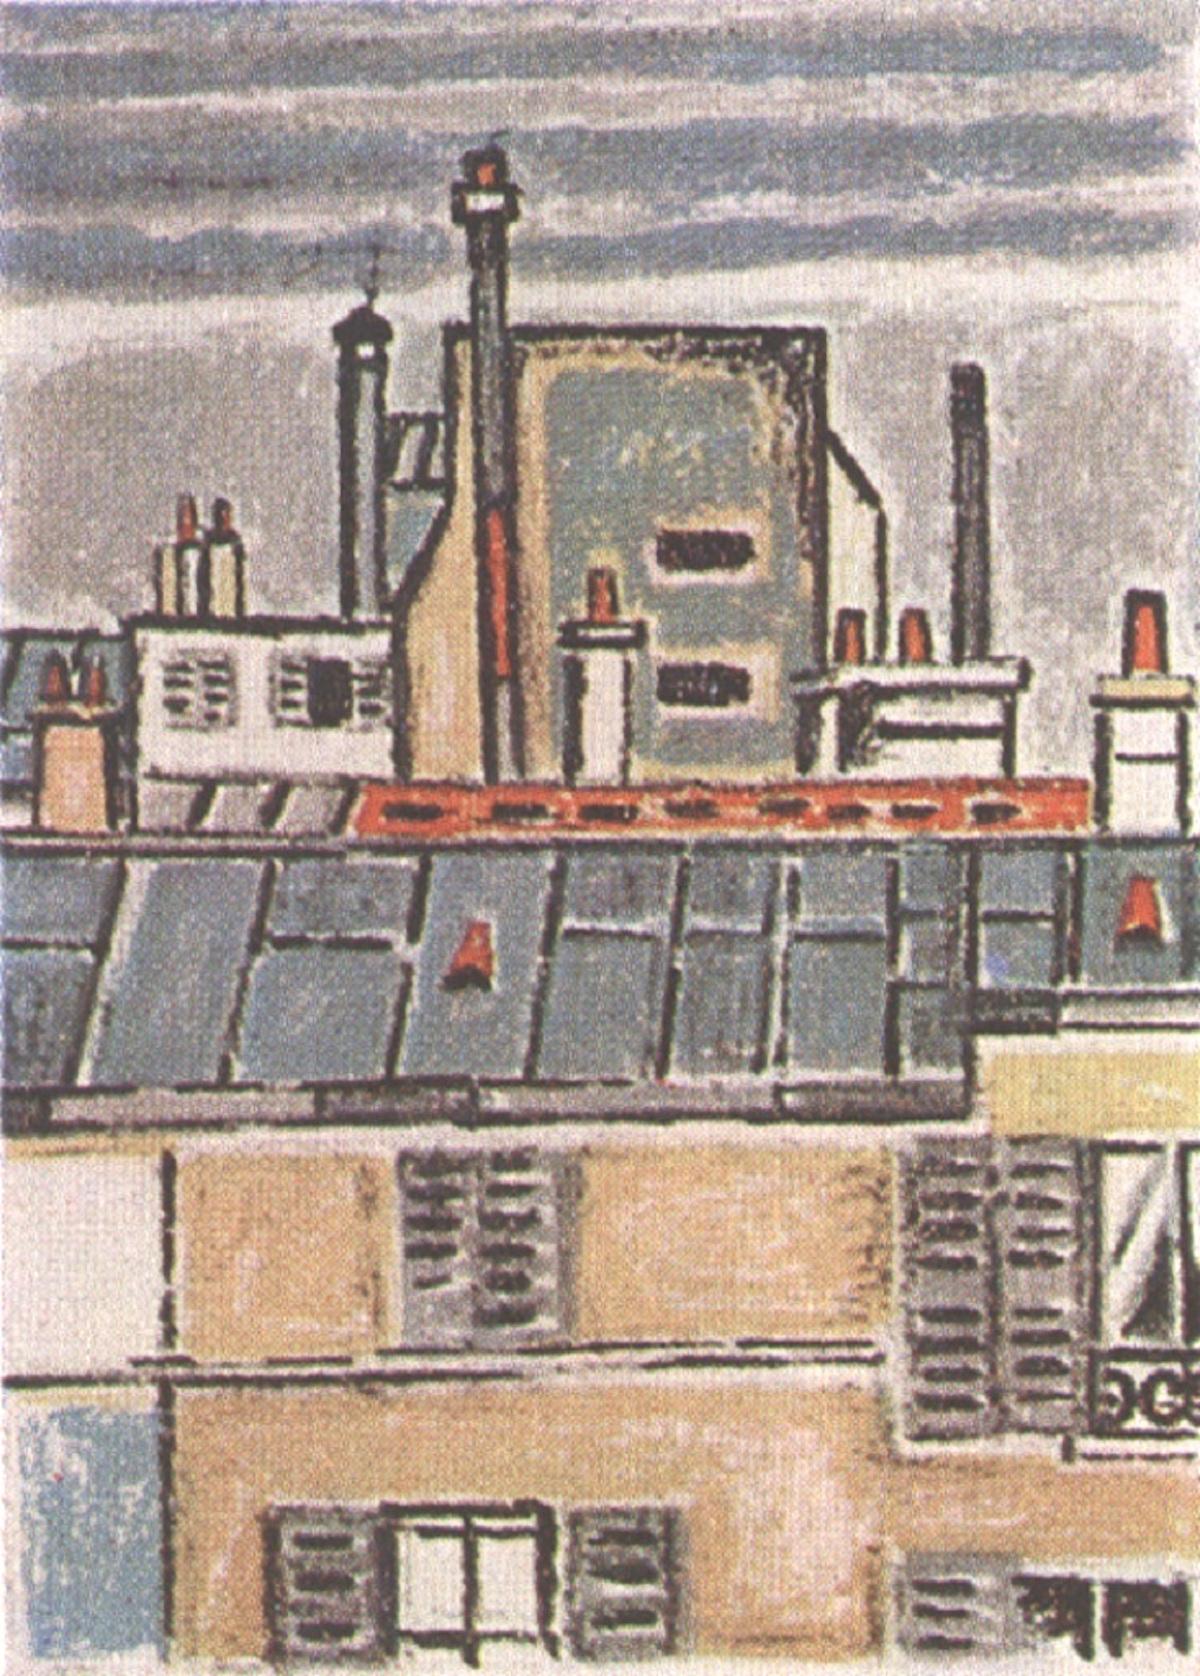 Roofs and Chimneys - Lithograph by Orfeo Tamburi - 1973/75